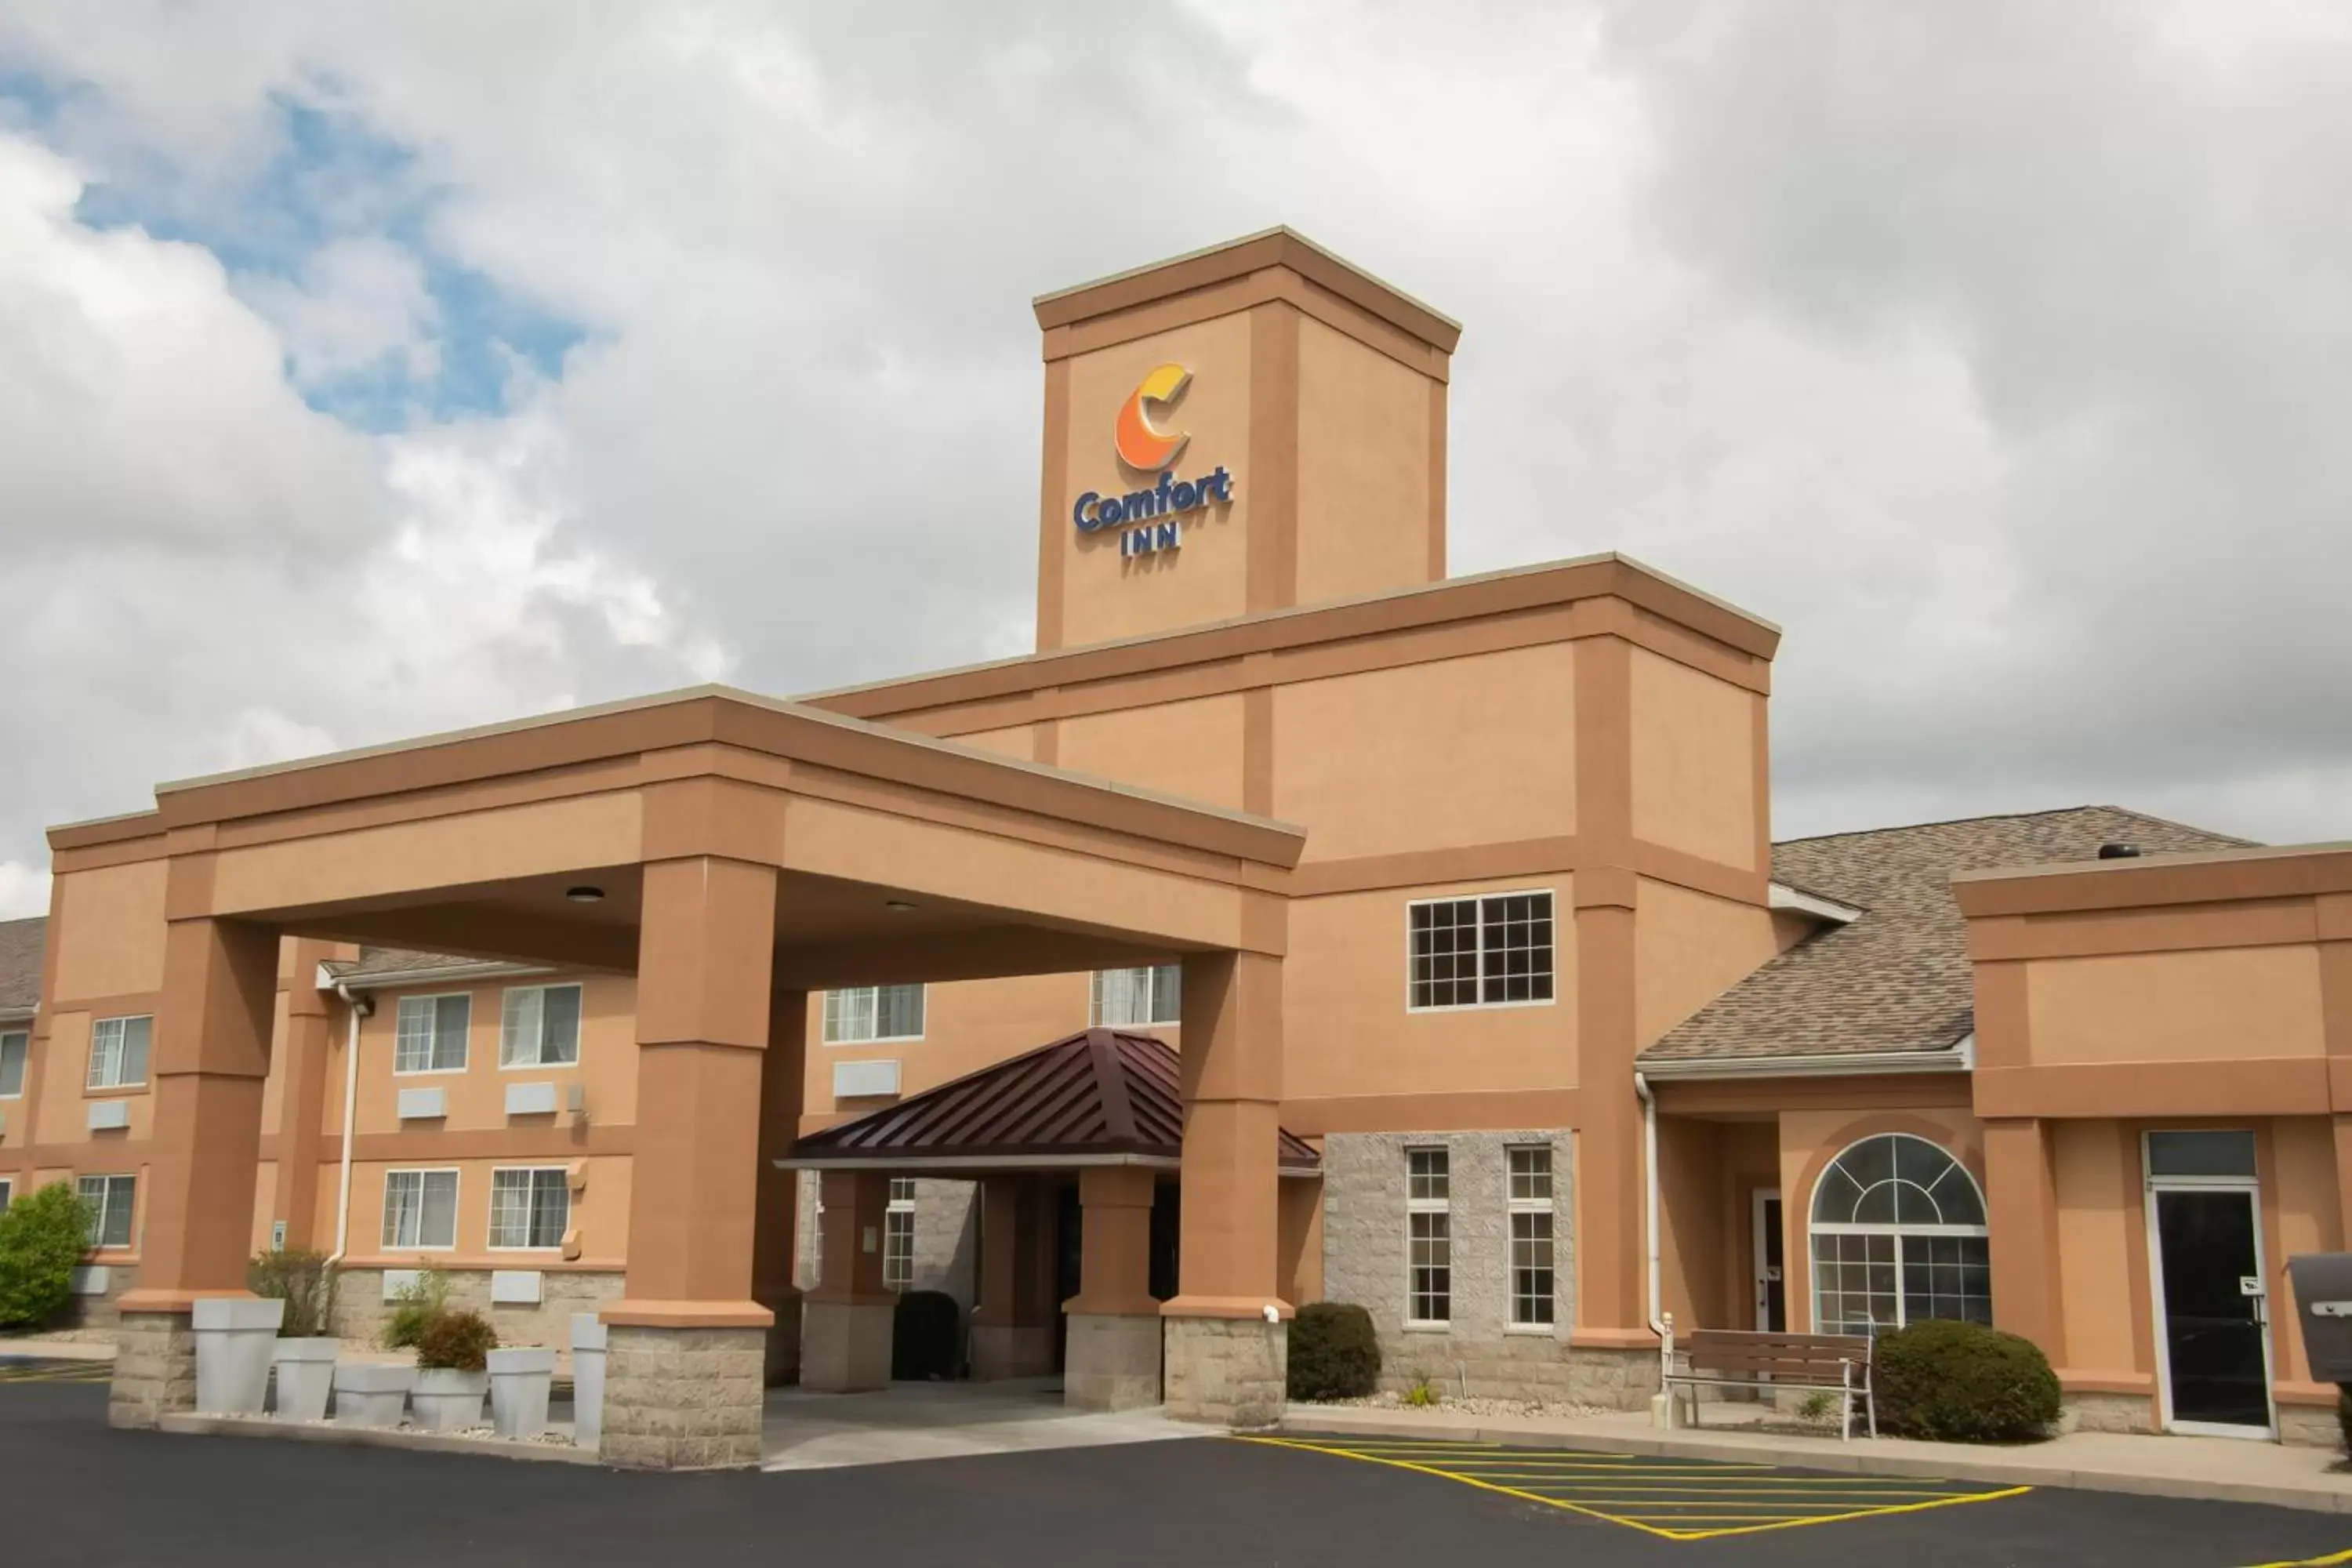 Property Building in Comfort Inn Near Ouabache State Park